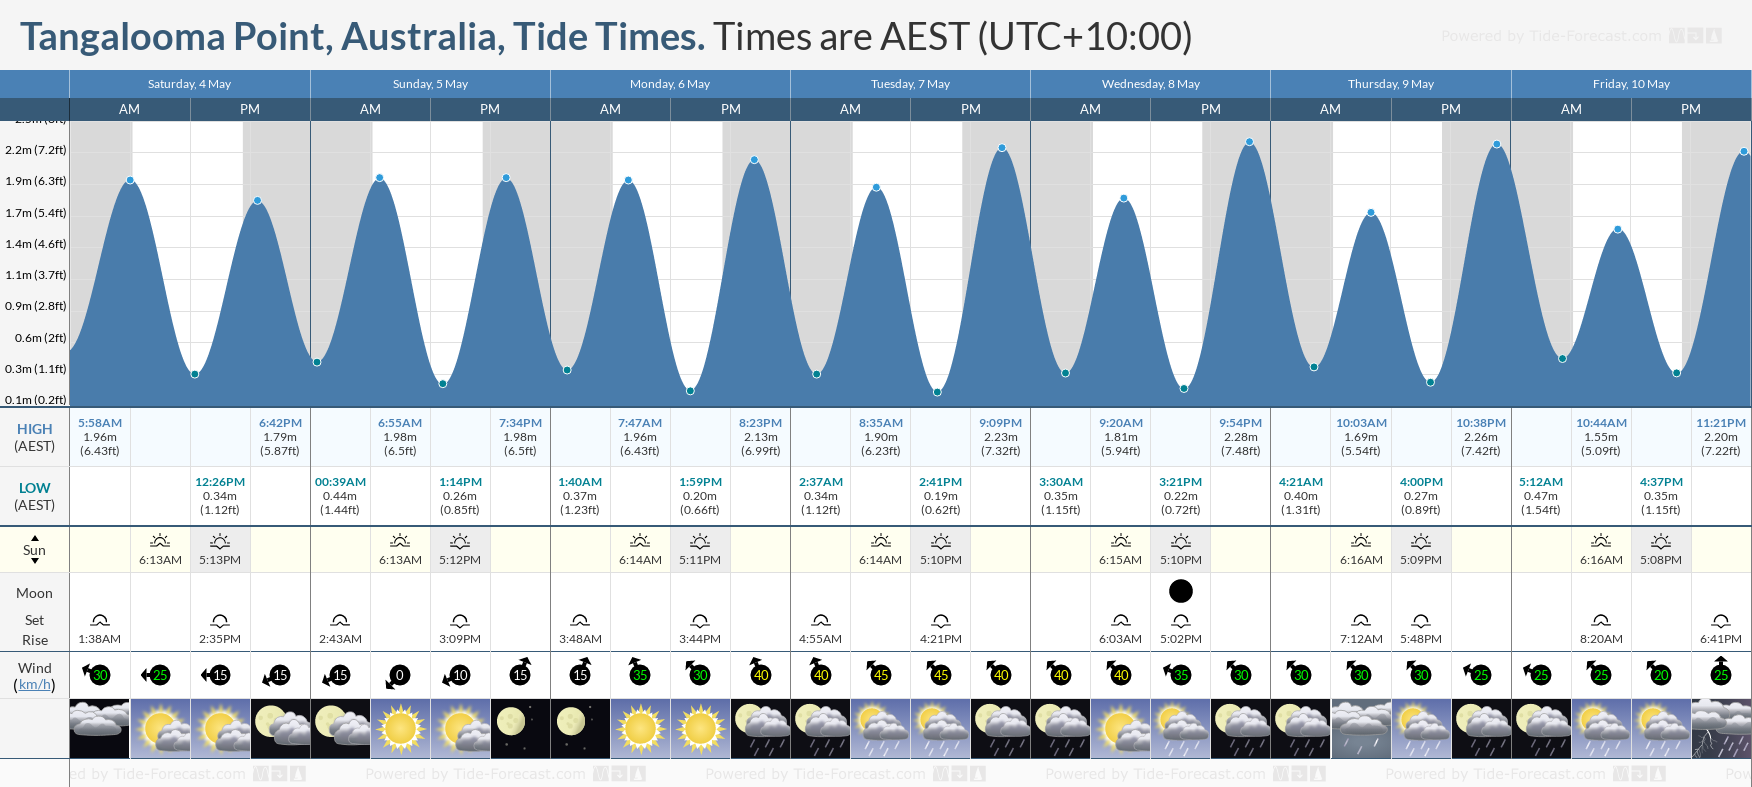 Tangalooma Point, Australia Tide Chart including high and low tide tide times for the next 7 days